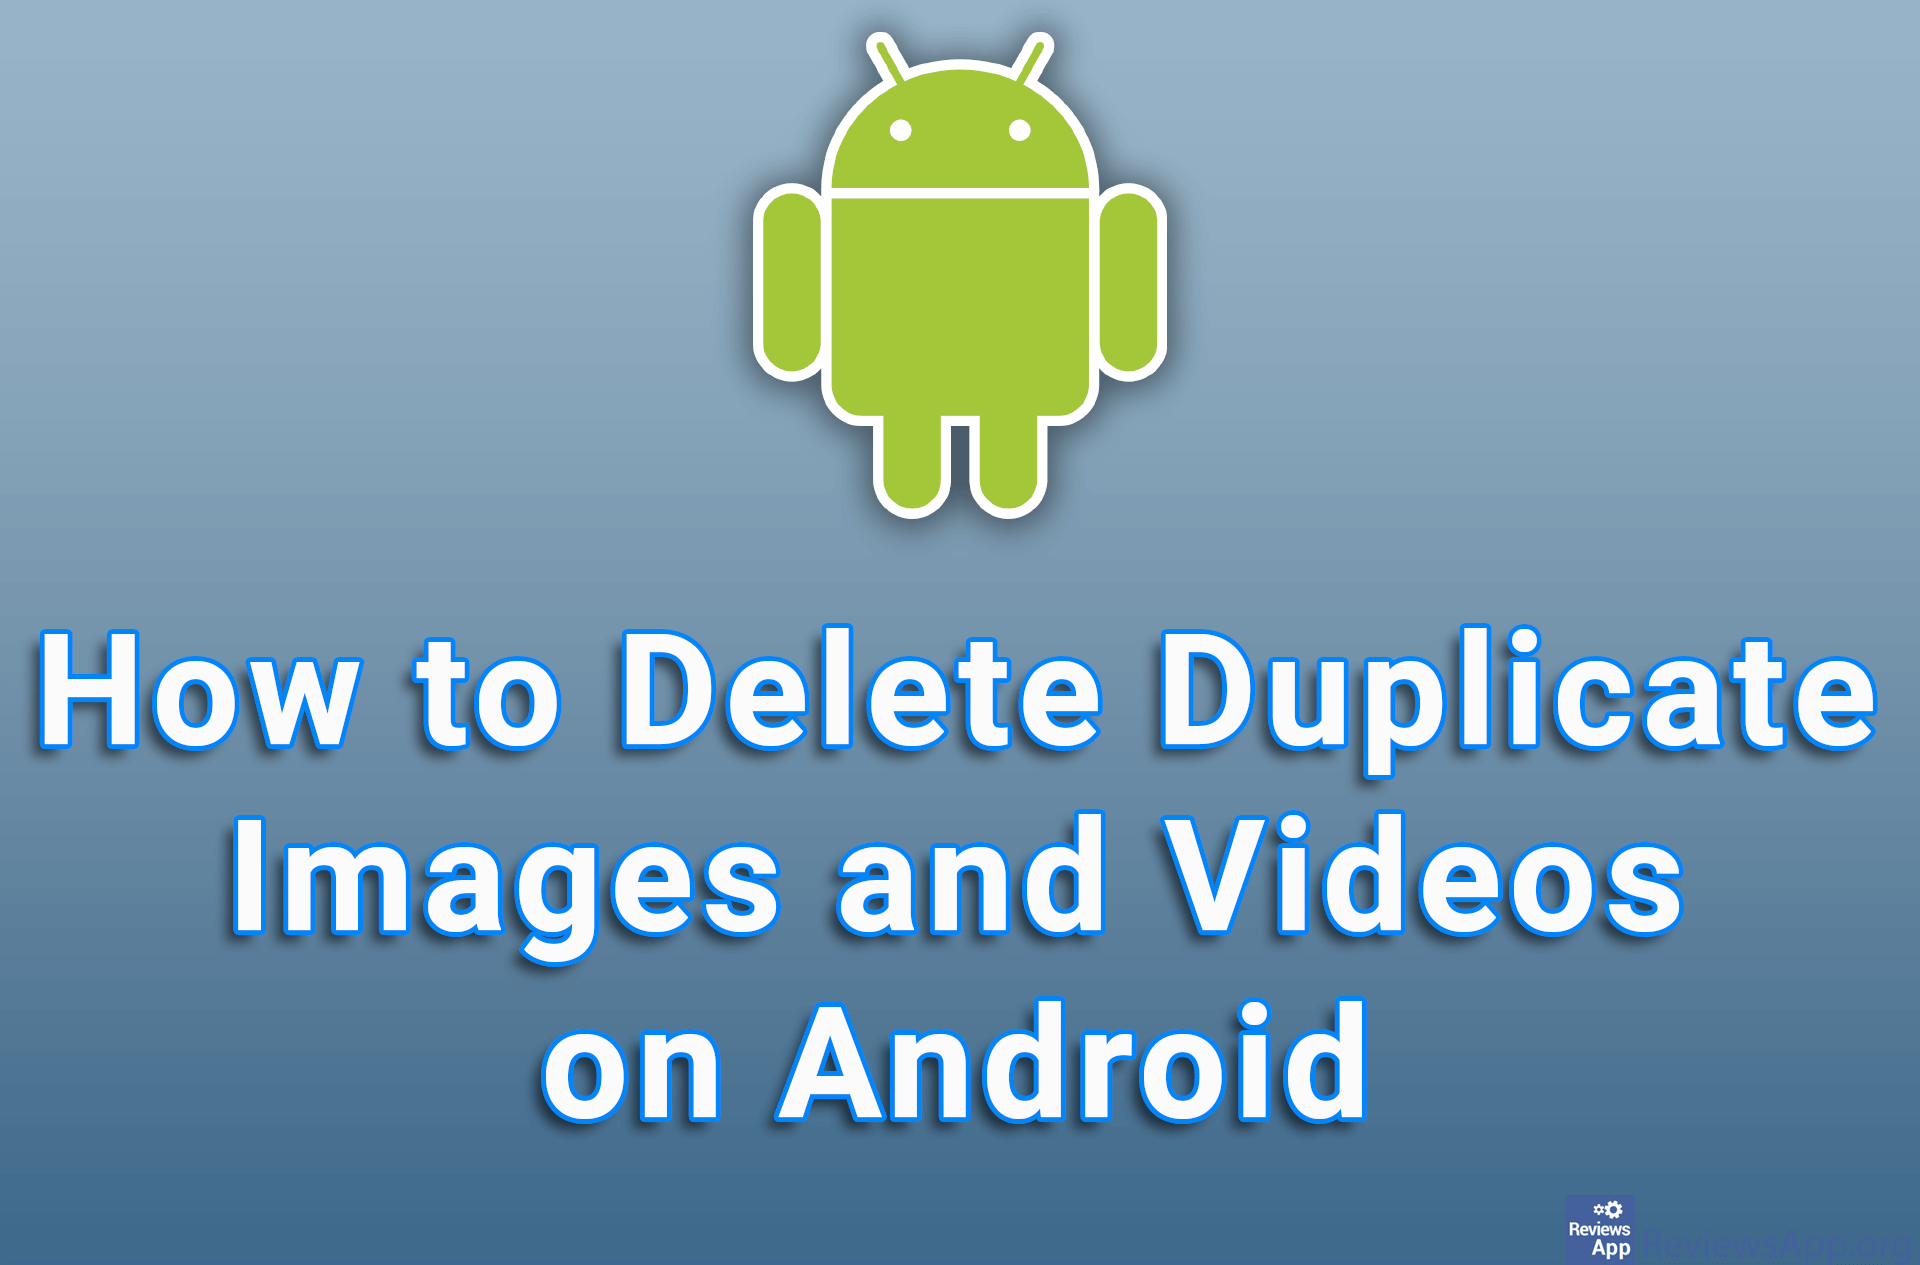 How to Delete Duplicate Images and Videos on Android